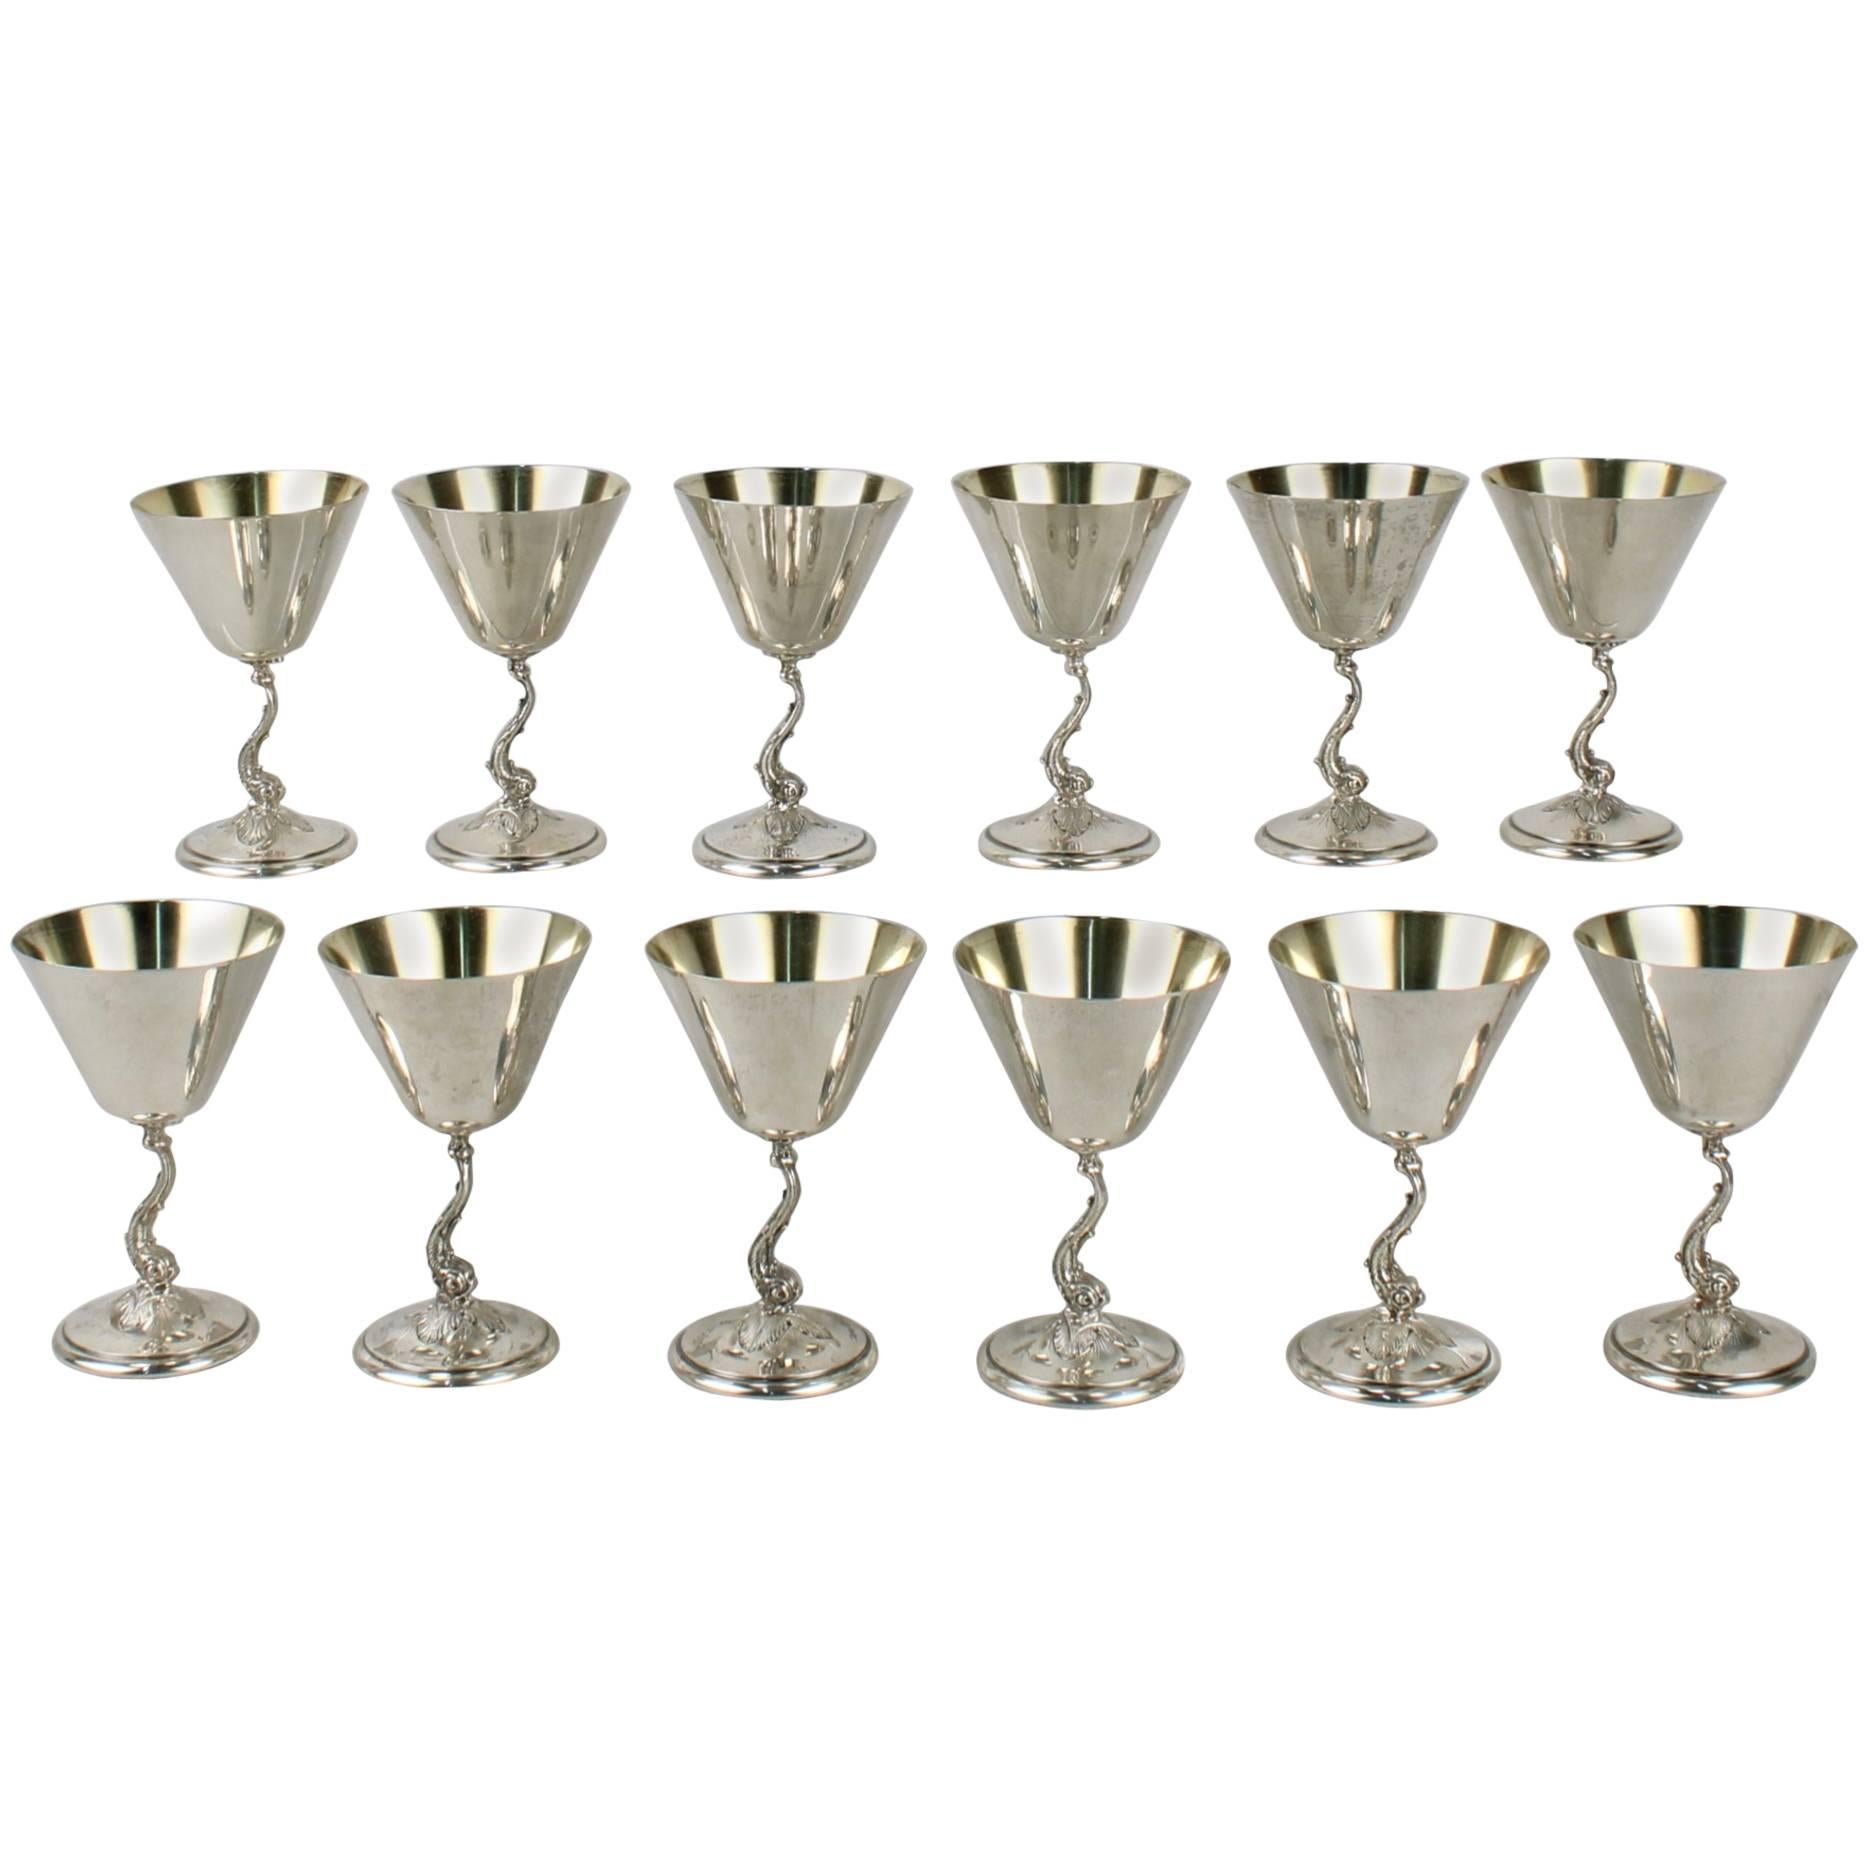 12 Gorham Art Deco Sterling Silver Dolphin Martini Goblets or Cocktail Stems